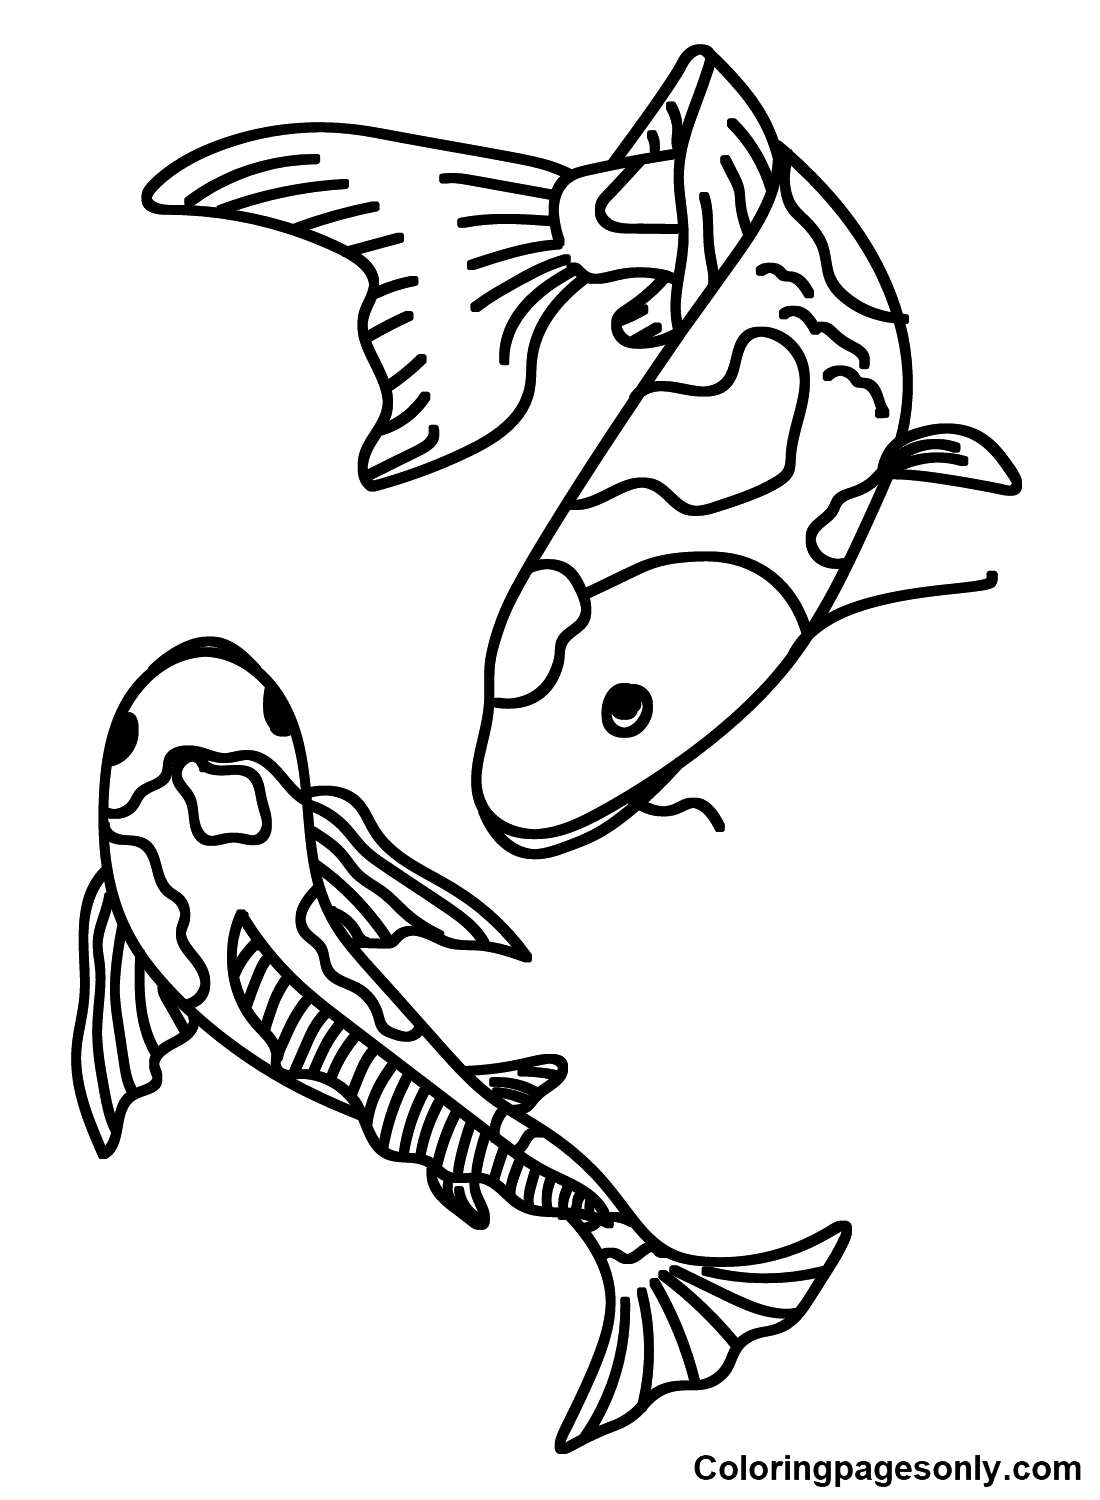 Image Koi Fish Coloring Pages